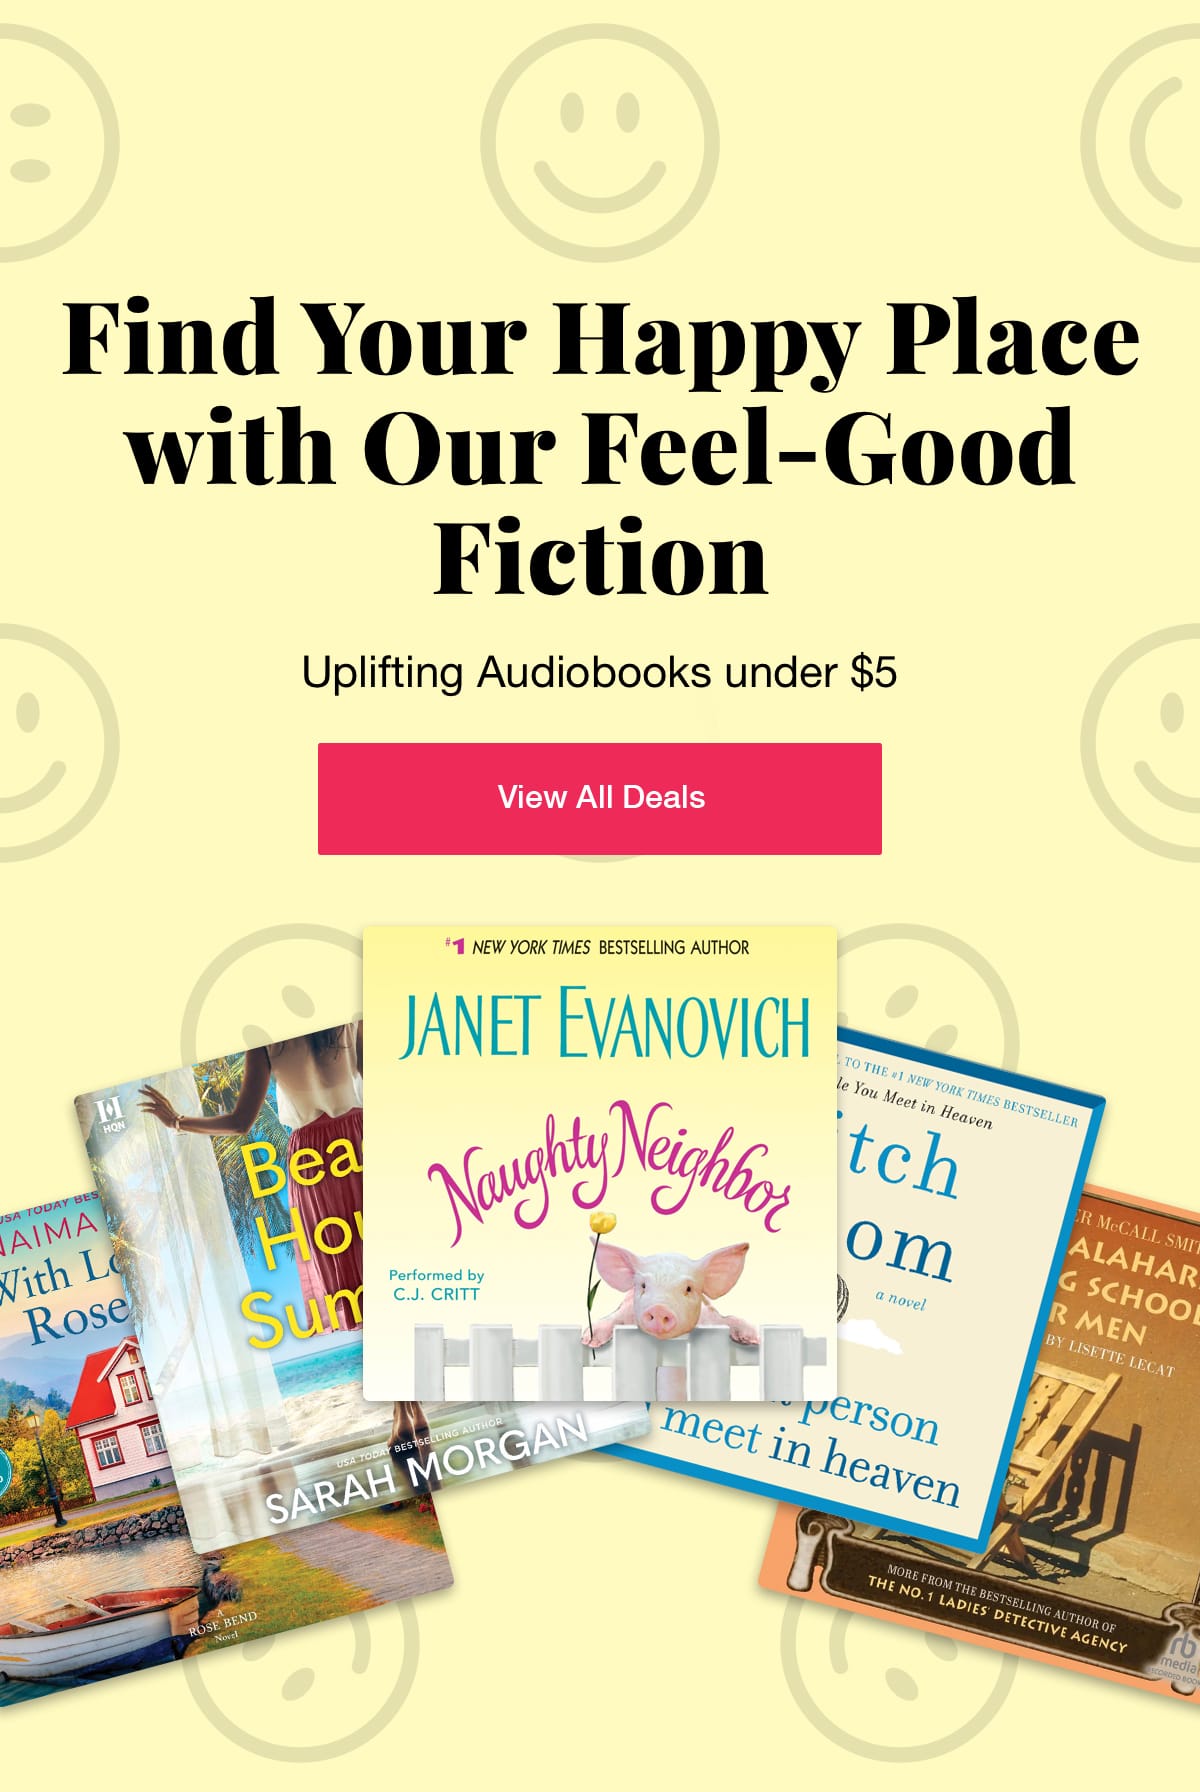 Find your Happy Place with our Feel-Good Fiction Sale Uplifting Audiobooks under $5